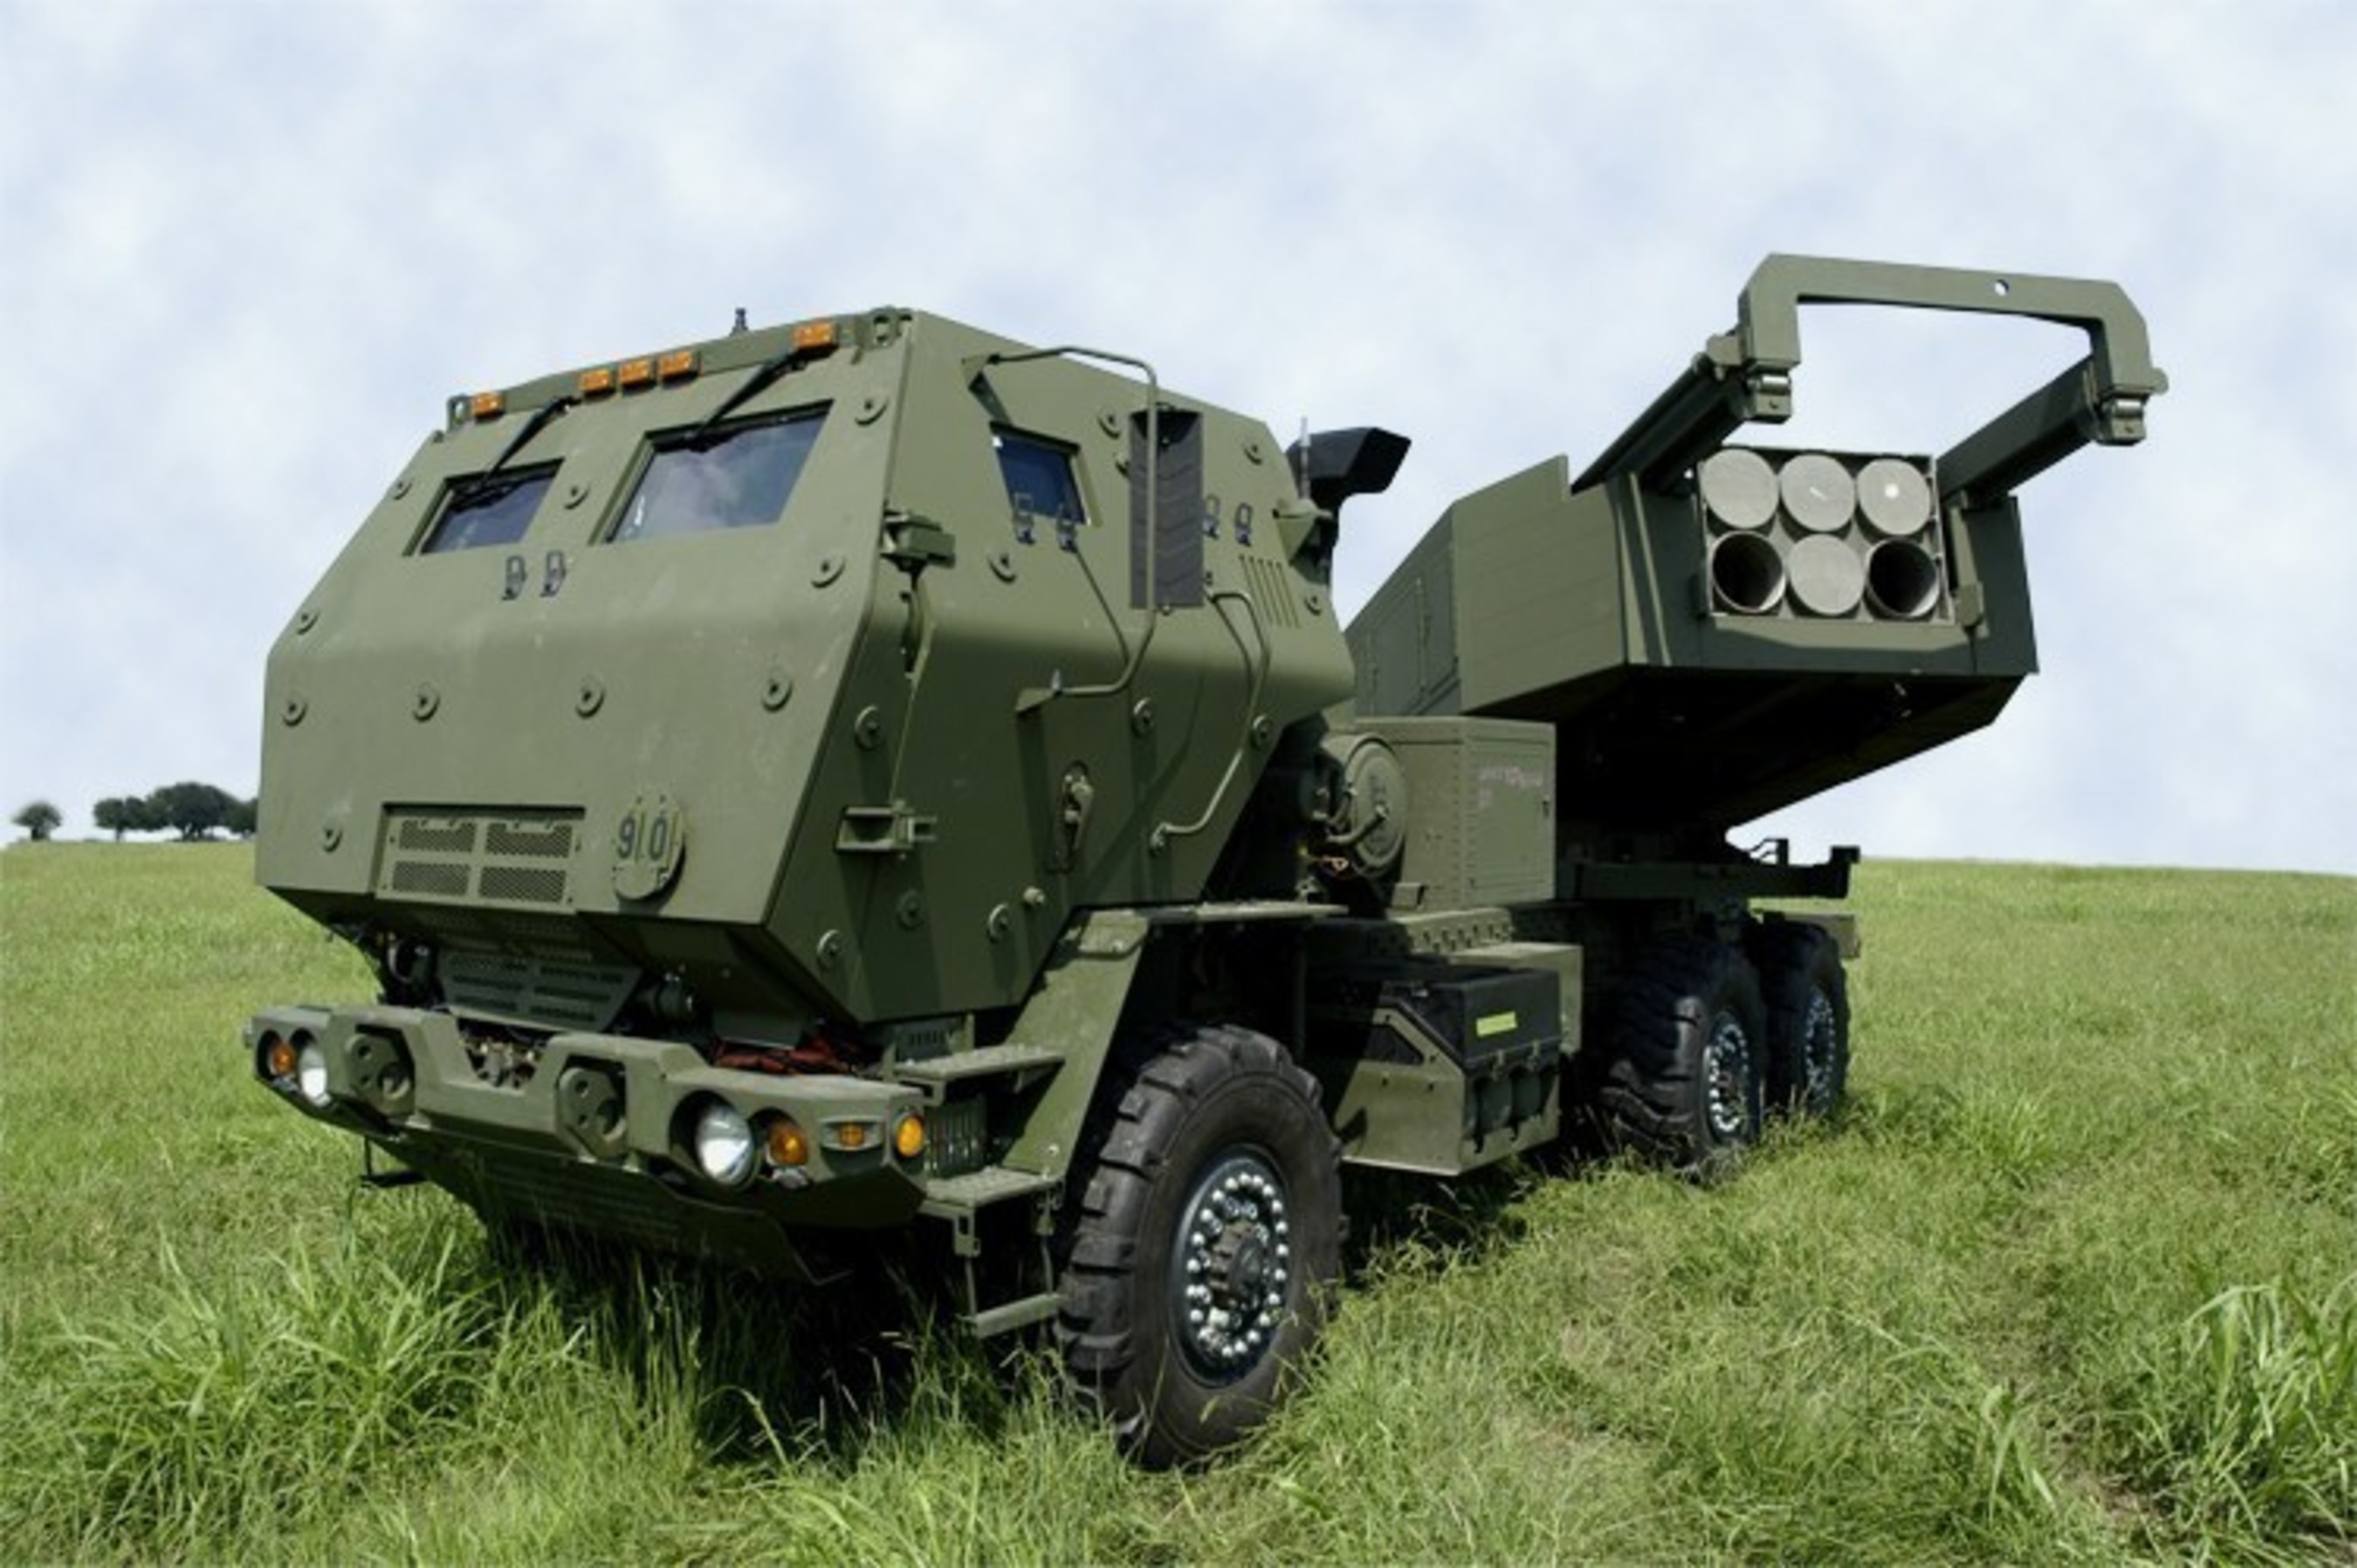 The Lockheed Martin HIMARS launcher fires both GMLRS rockets and ATACMS missiles to strike targets with surgical precision.